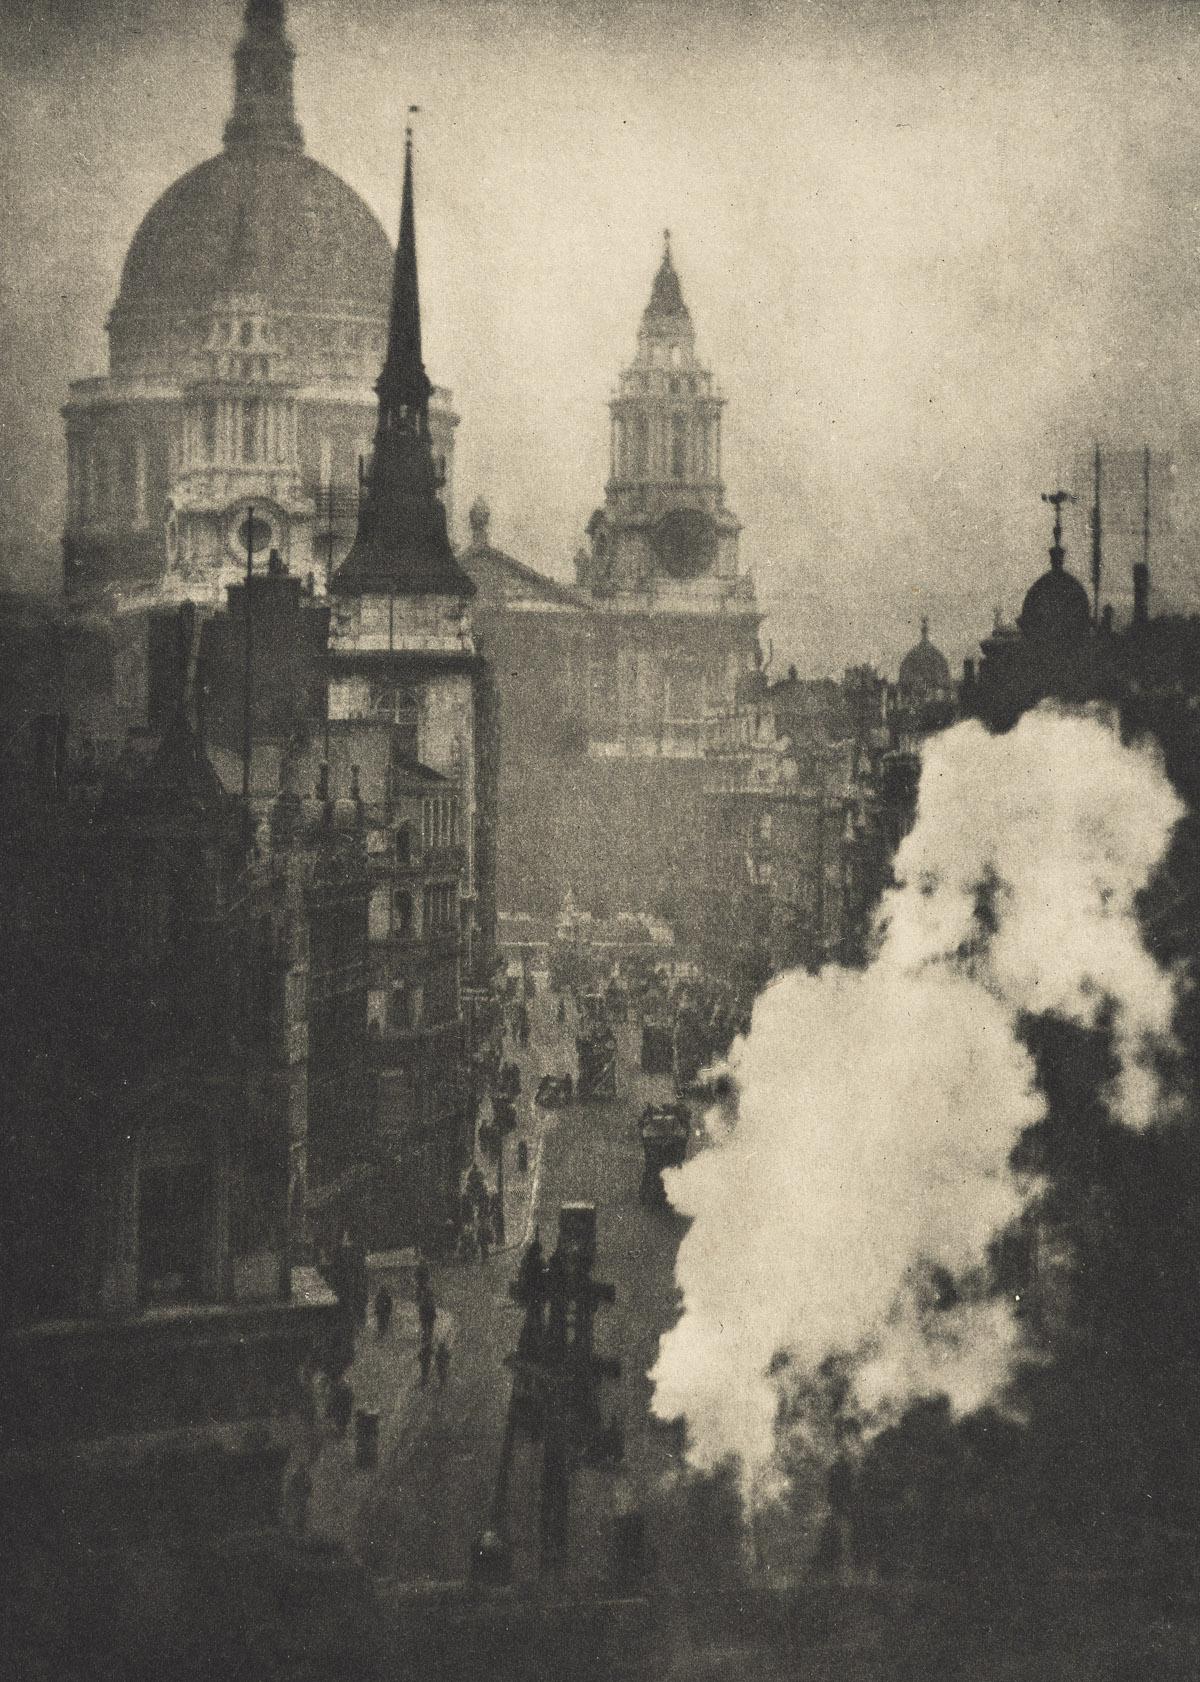 ALVIN LANGDON COBURN (1882-1966) A complete set of 20 unbound photogravures from the publication London.